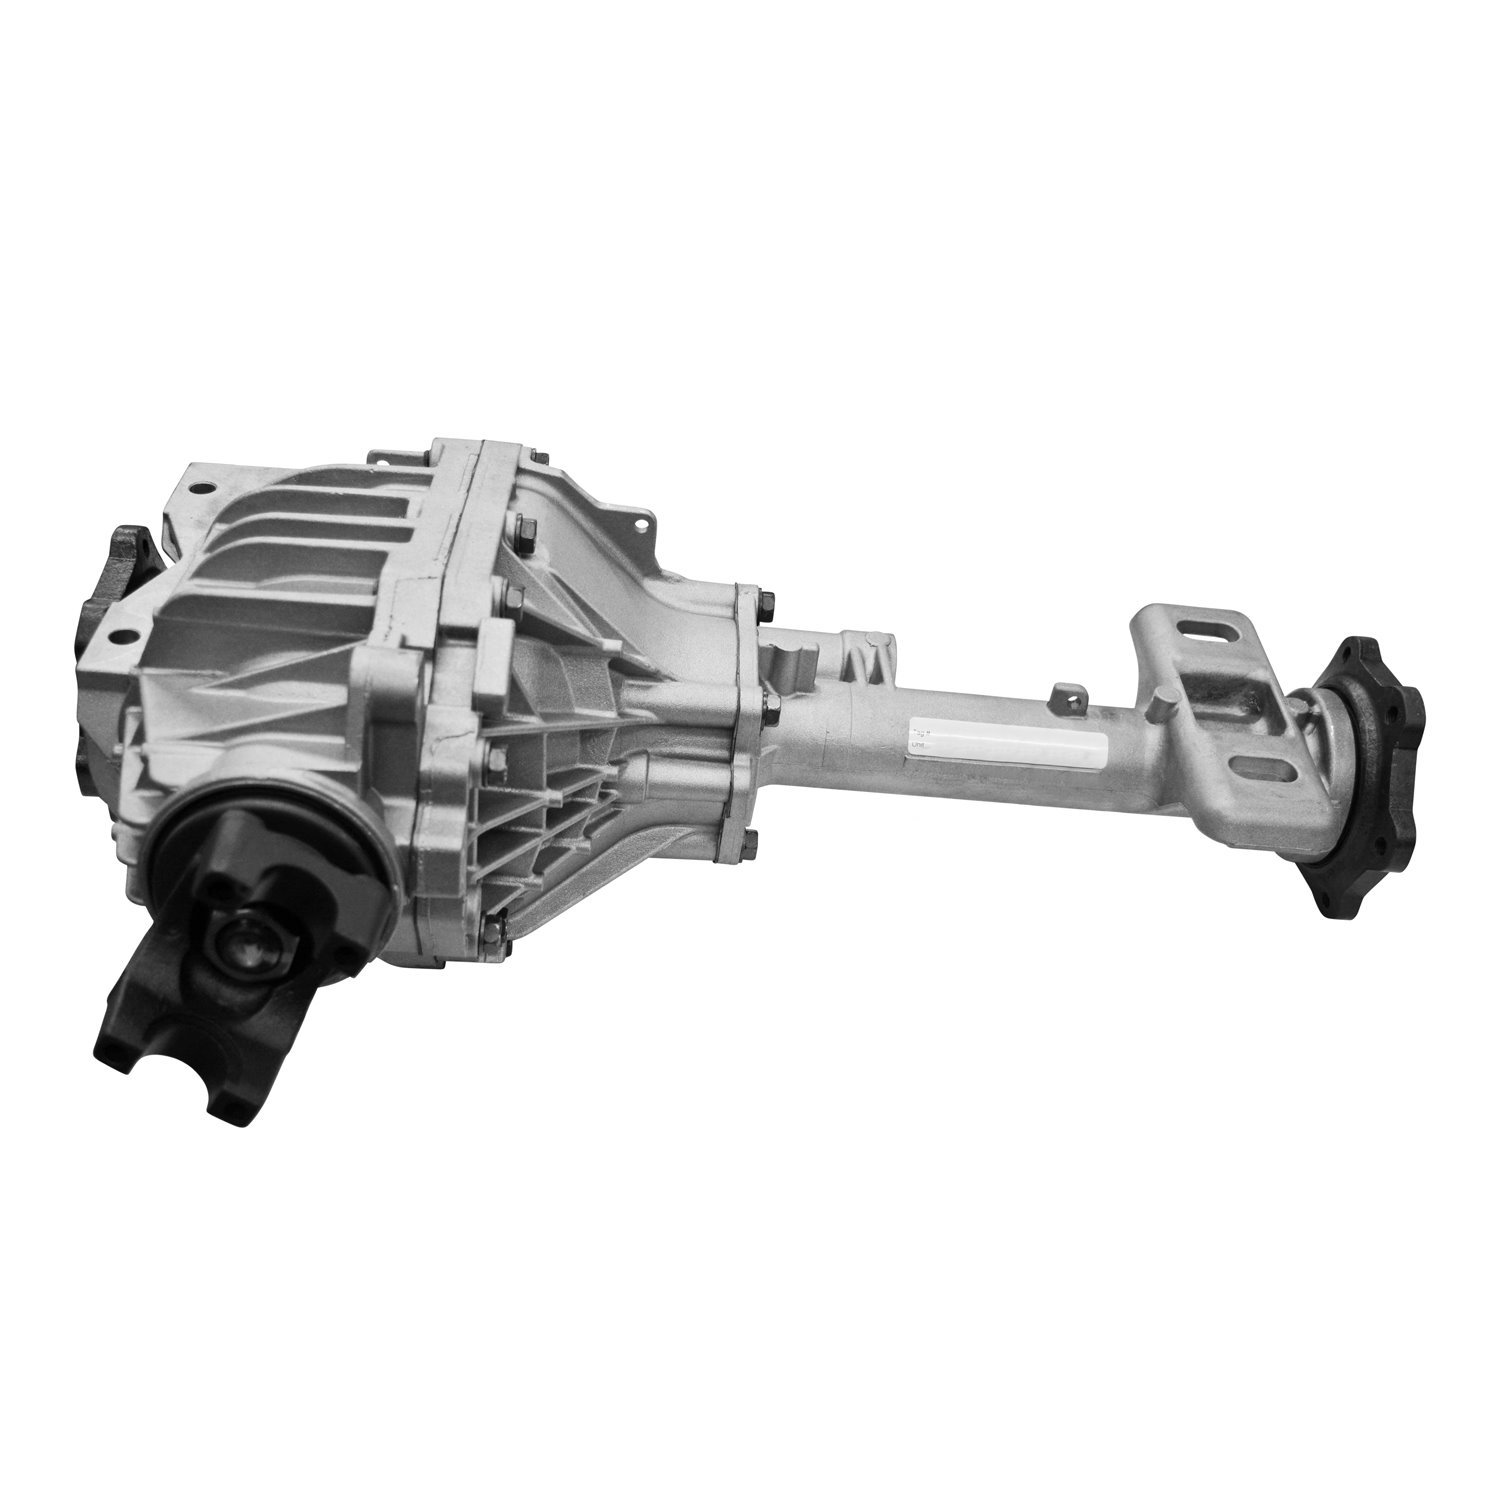 RAA440-1472 Remanufactured Front Axle Assembly, GM 8.25IFS, 2013-2018 GM 1500 Truck and SUV, 3.42 Ratio